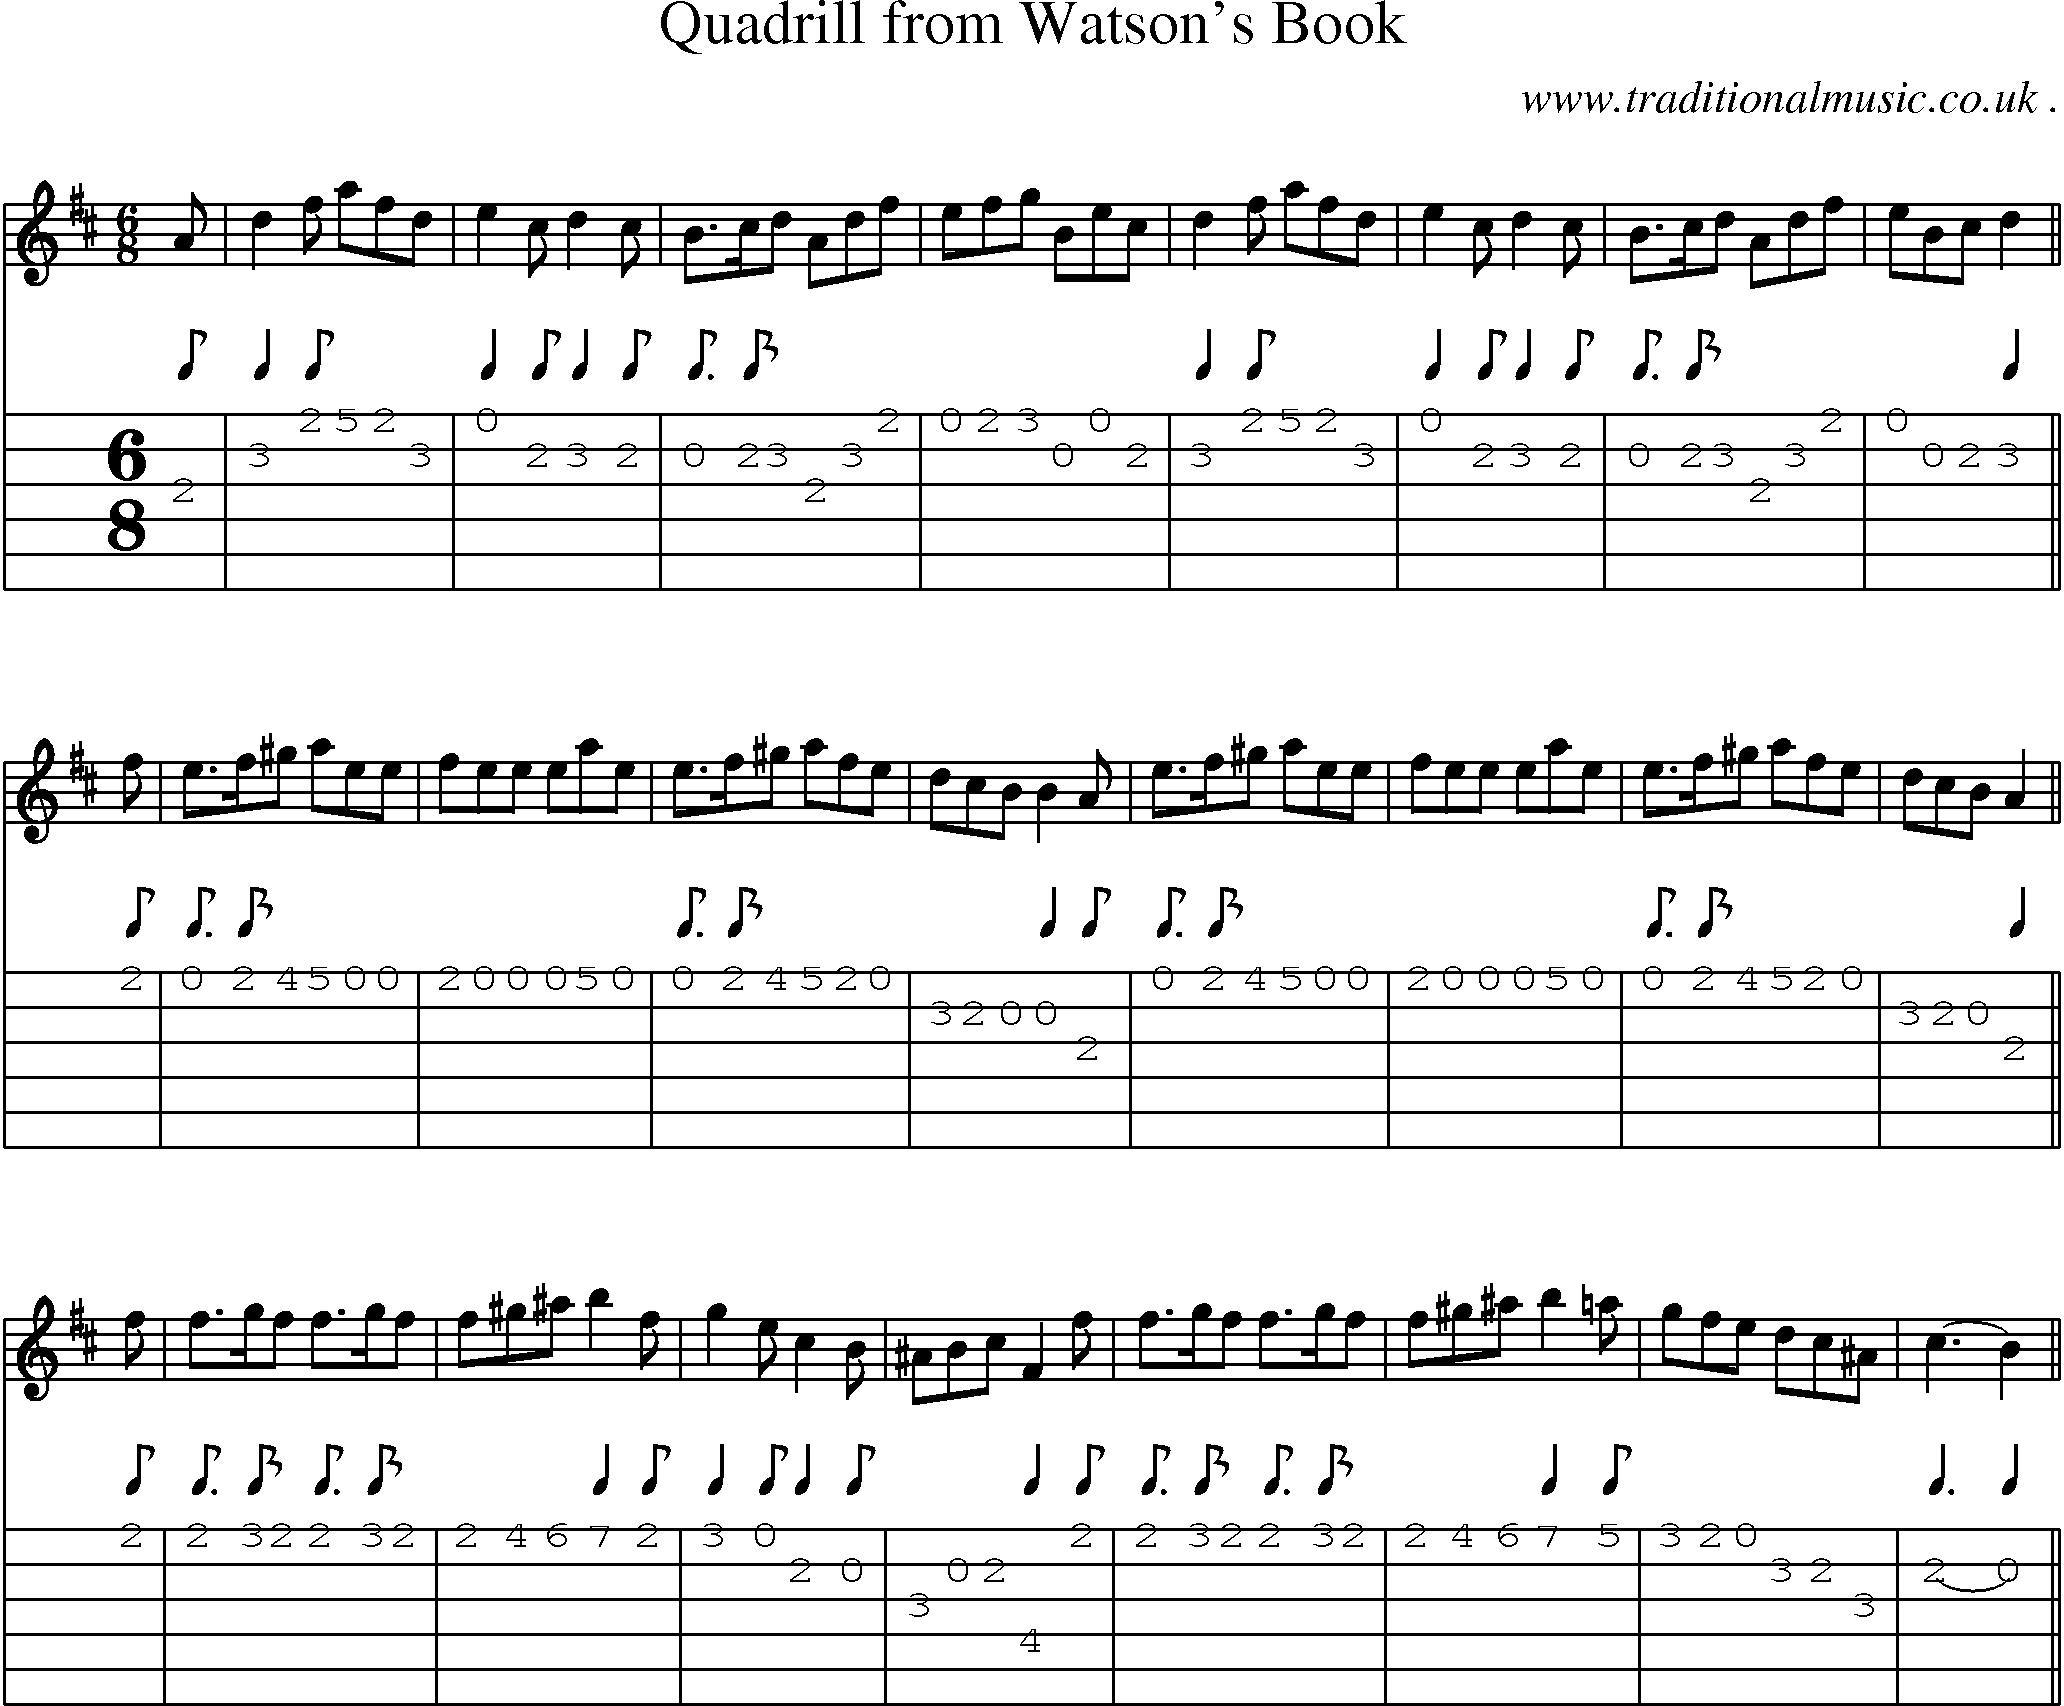 Sheet-Music and Guitar Tabs for Quadrill From Watsons Book